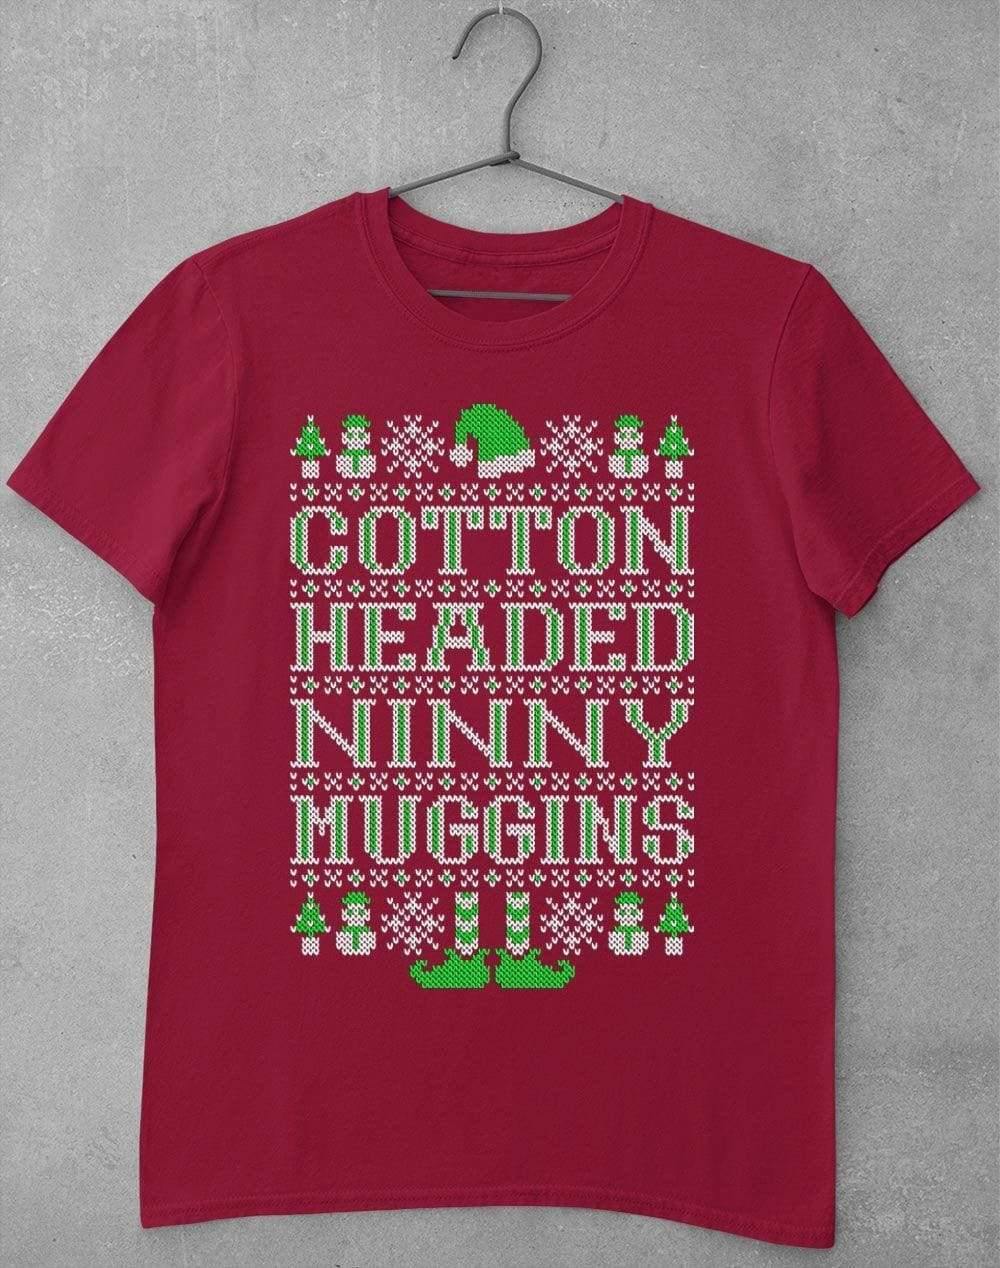 Cotton Headed Ninny Muggins Festive Knitted-Look T-Shirt S / Cardinal Red  - Off World Tees